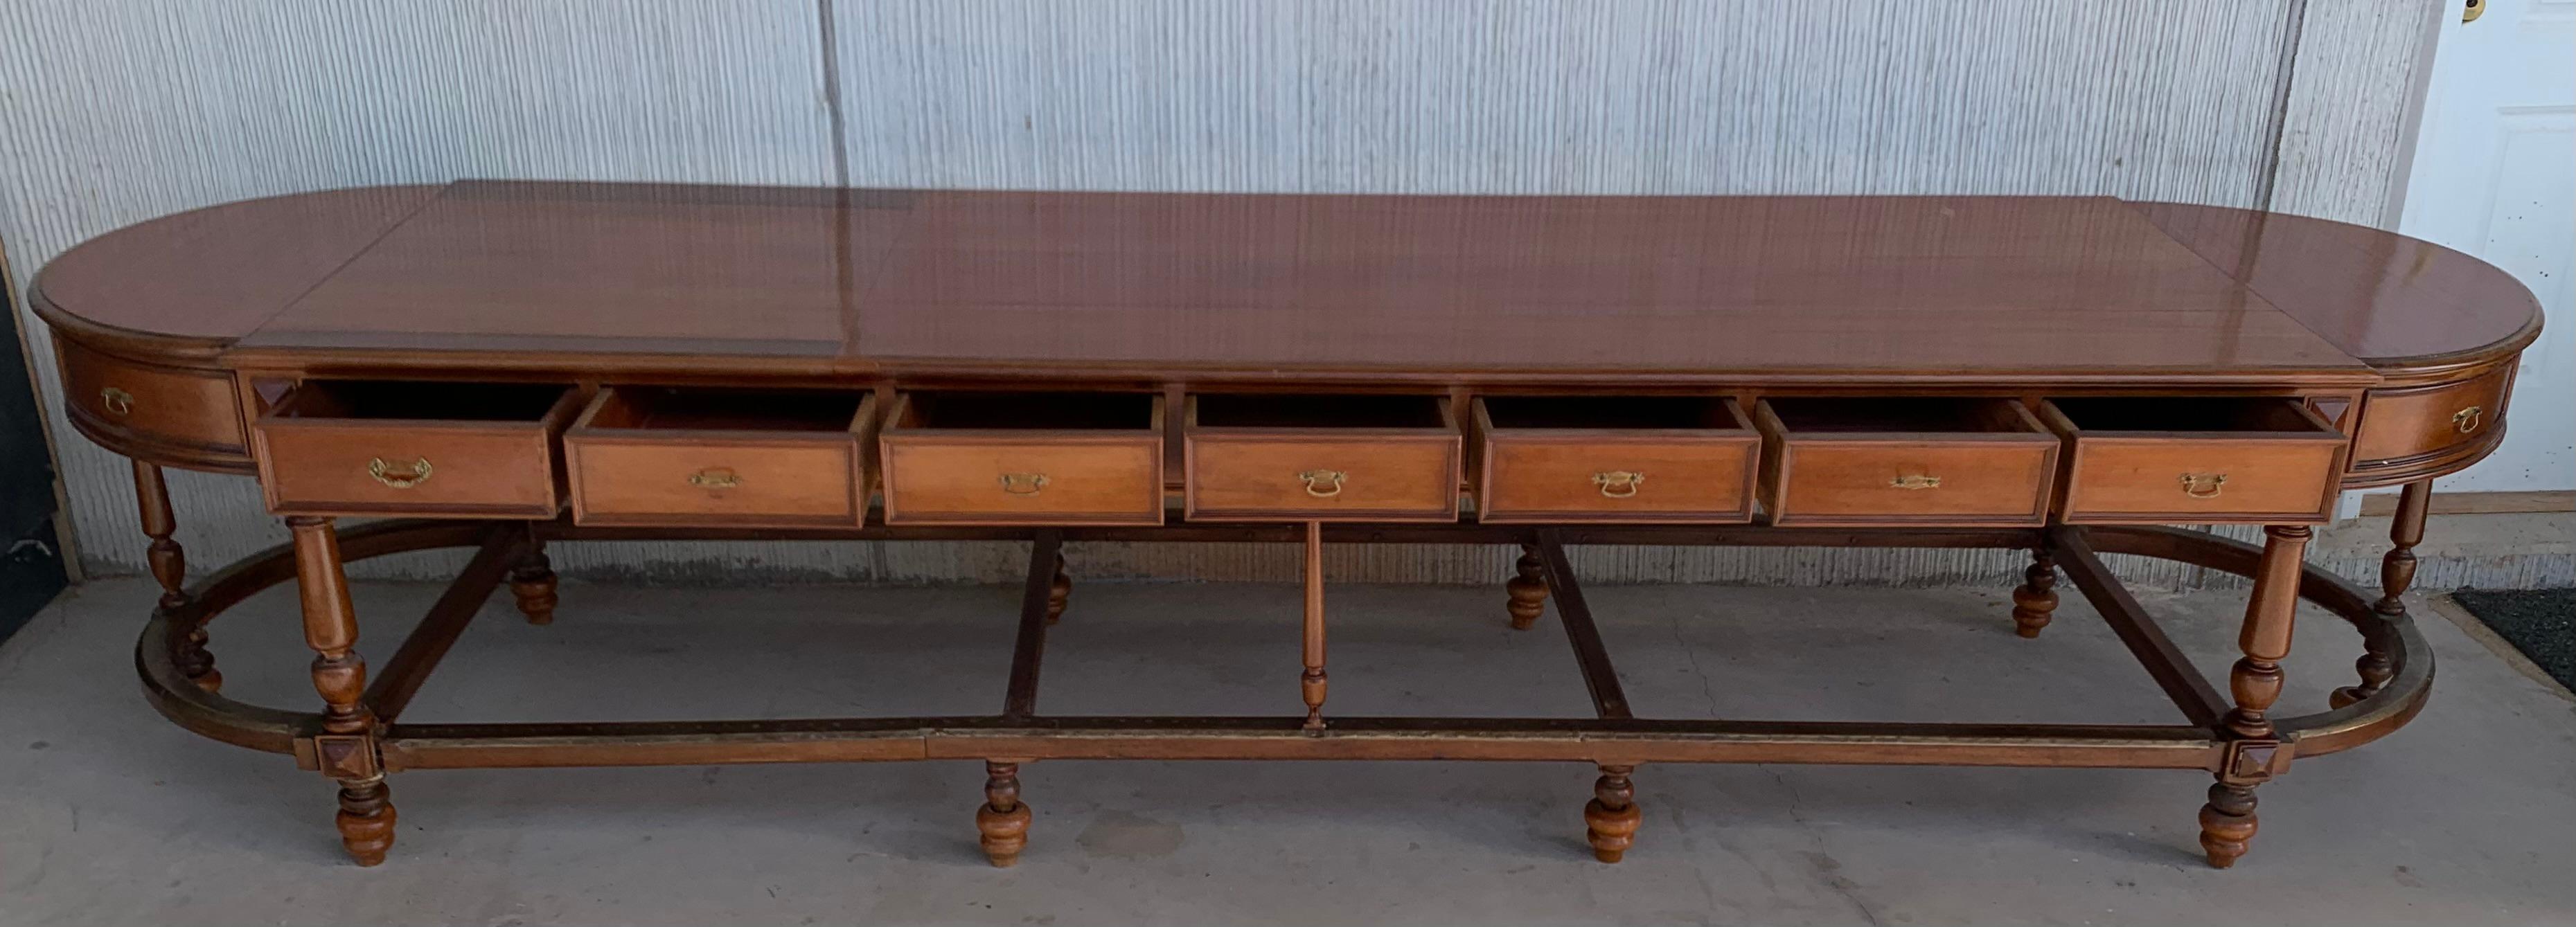 12 Foot Oval Center Table with Drawers in Both Sides, 20th Century For Sale 4